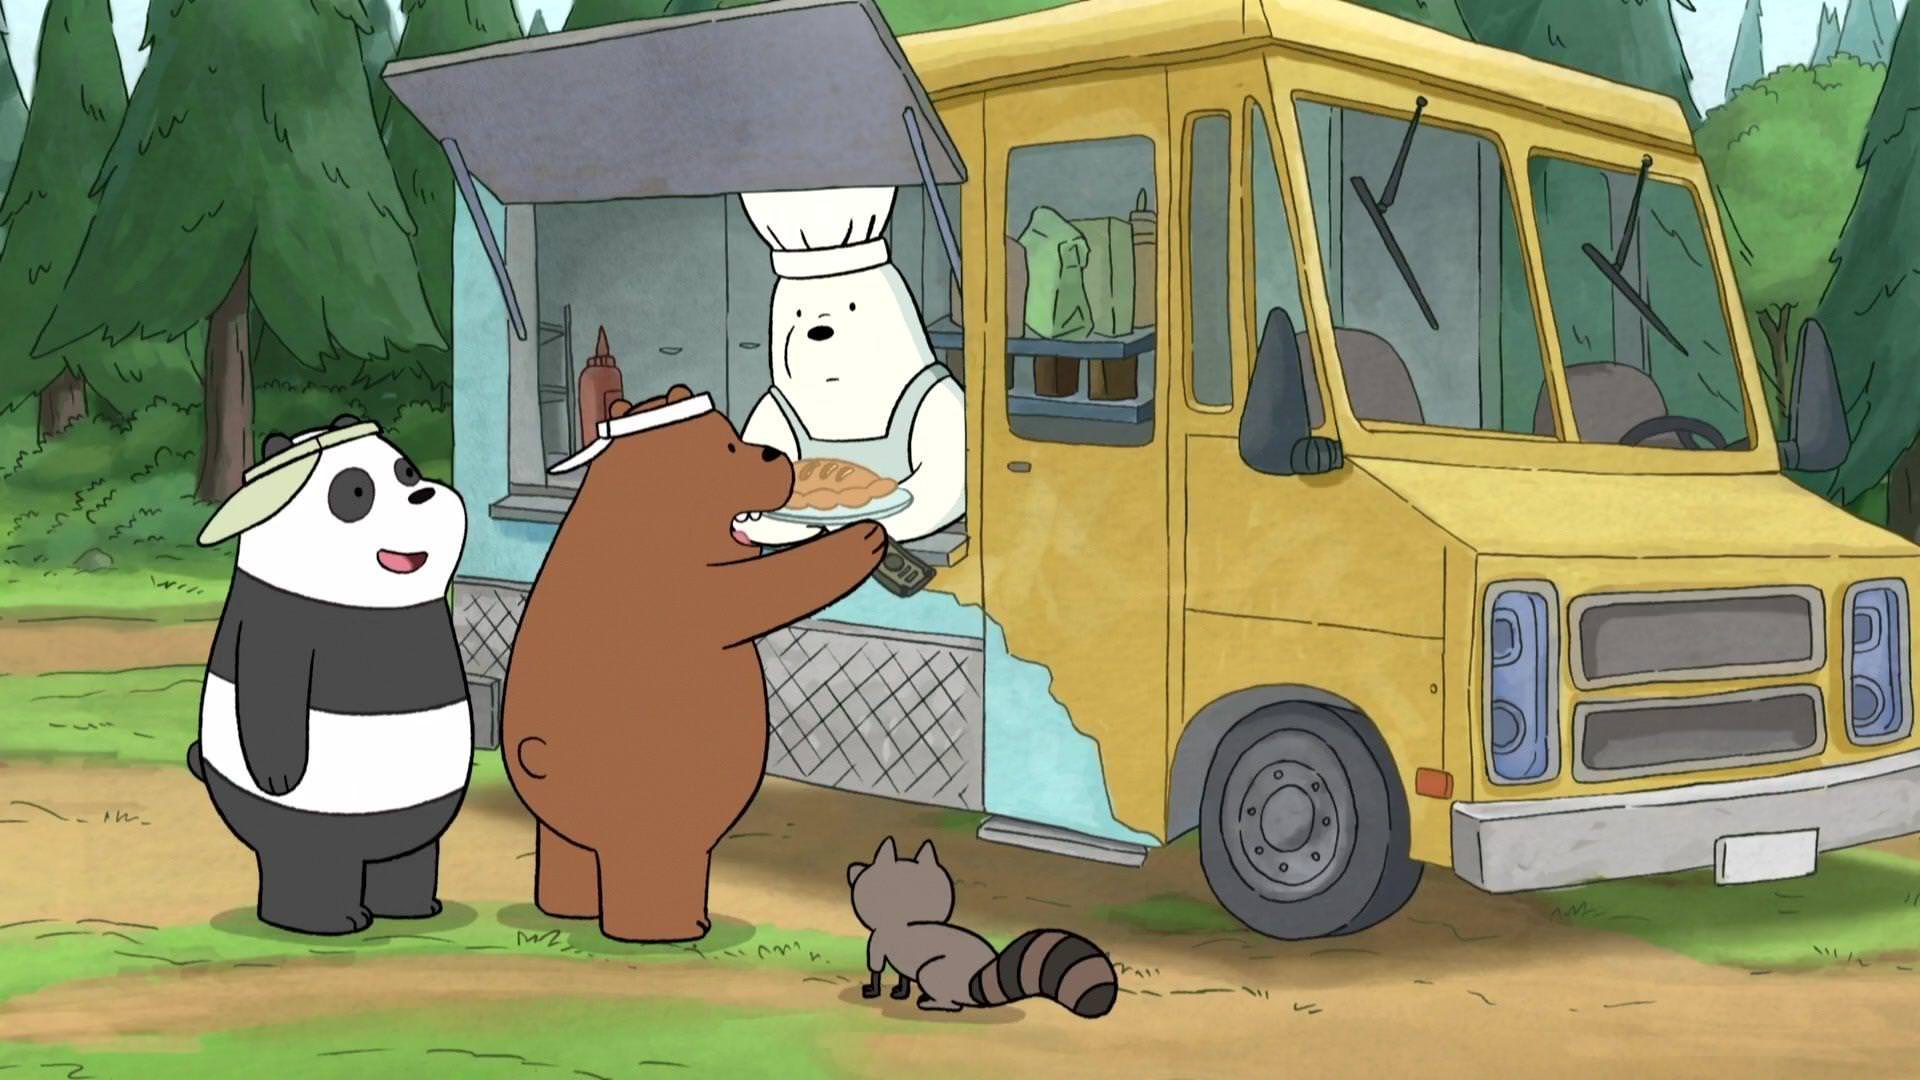 We Bare Bears is a show about three bears who live in a cave. - We Bare Bears